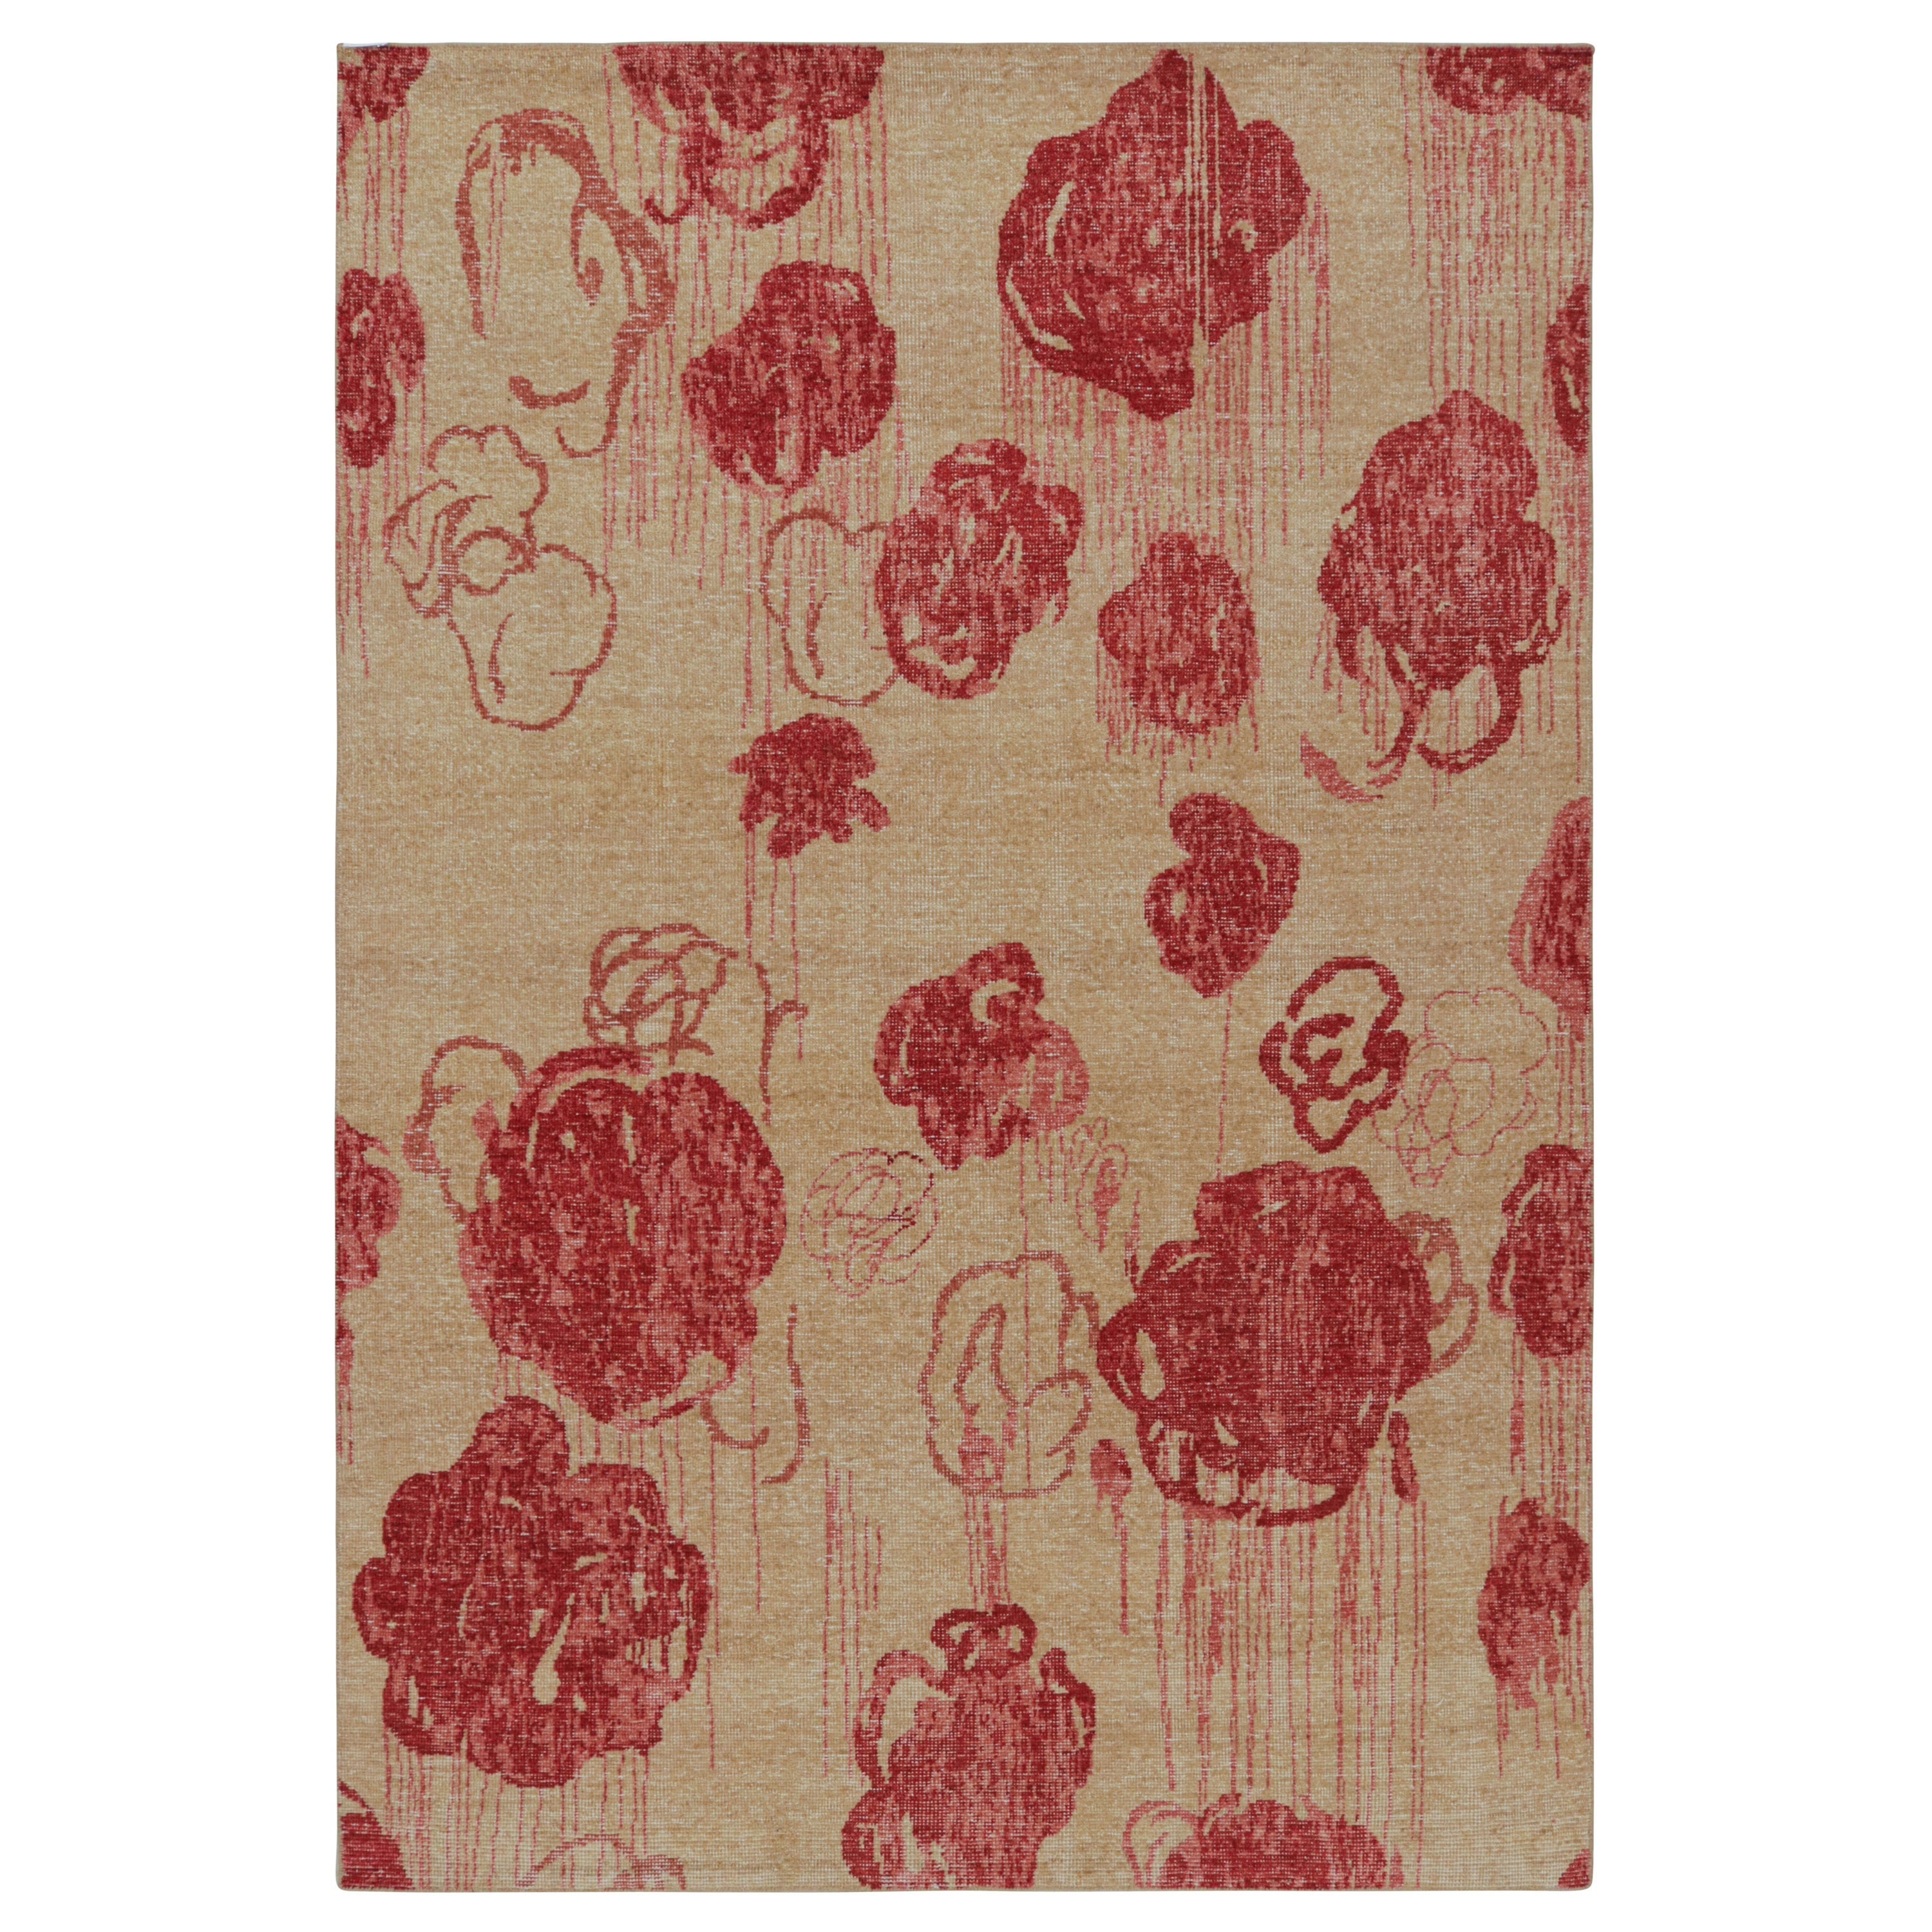 Rug & Kilim’s Modern Abstract Art Rug in Beige-Brown, with Red Floral Patterns For Sale